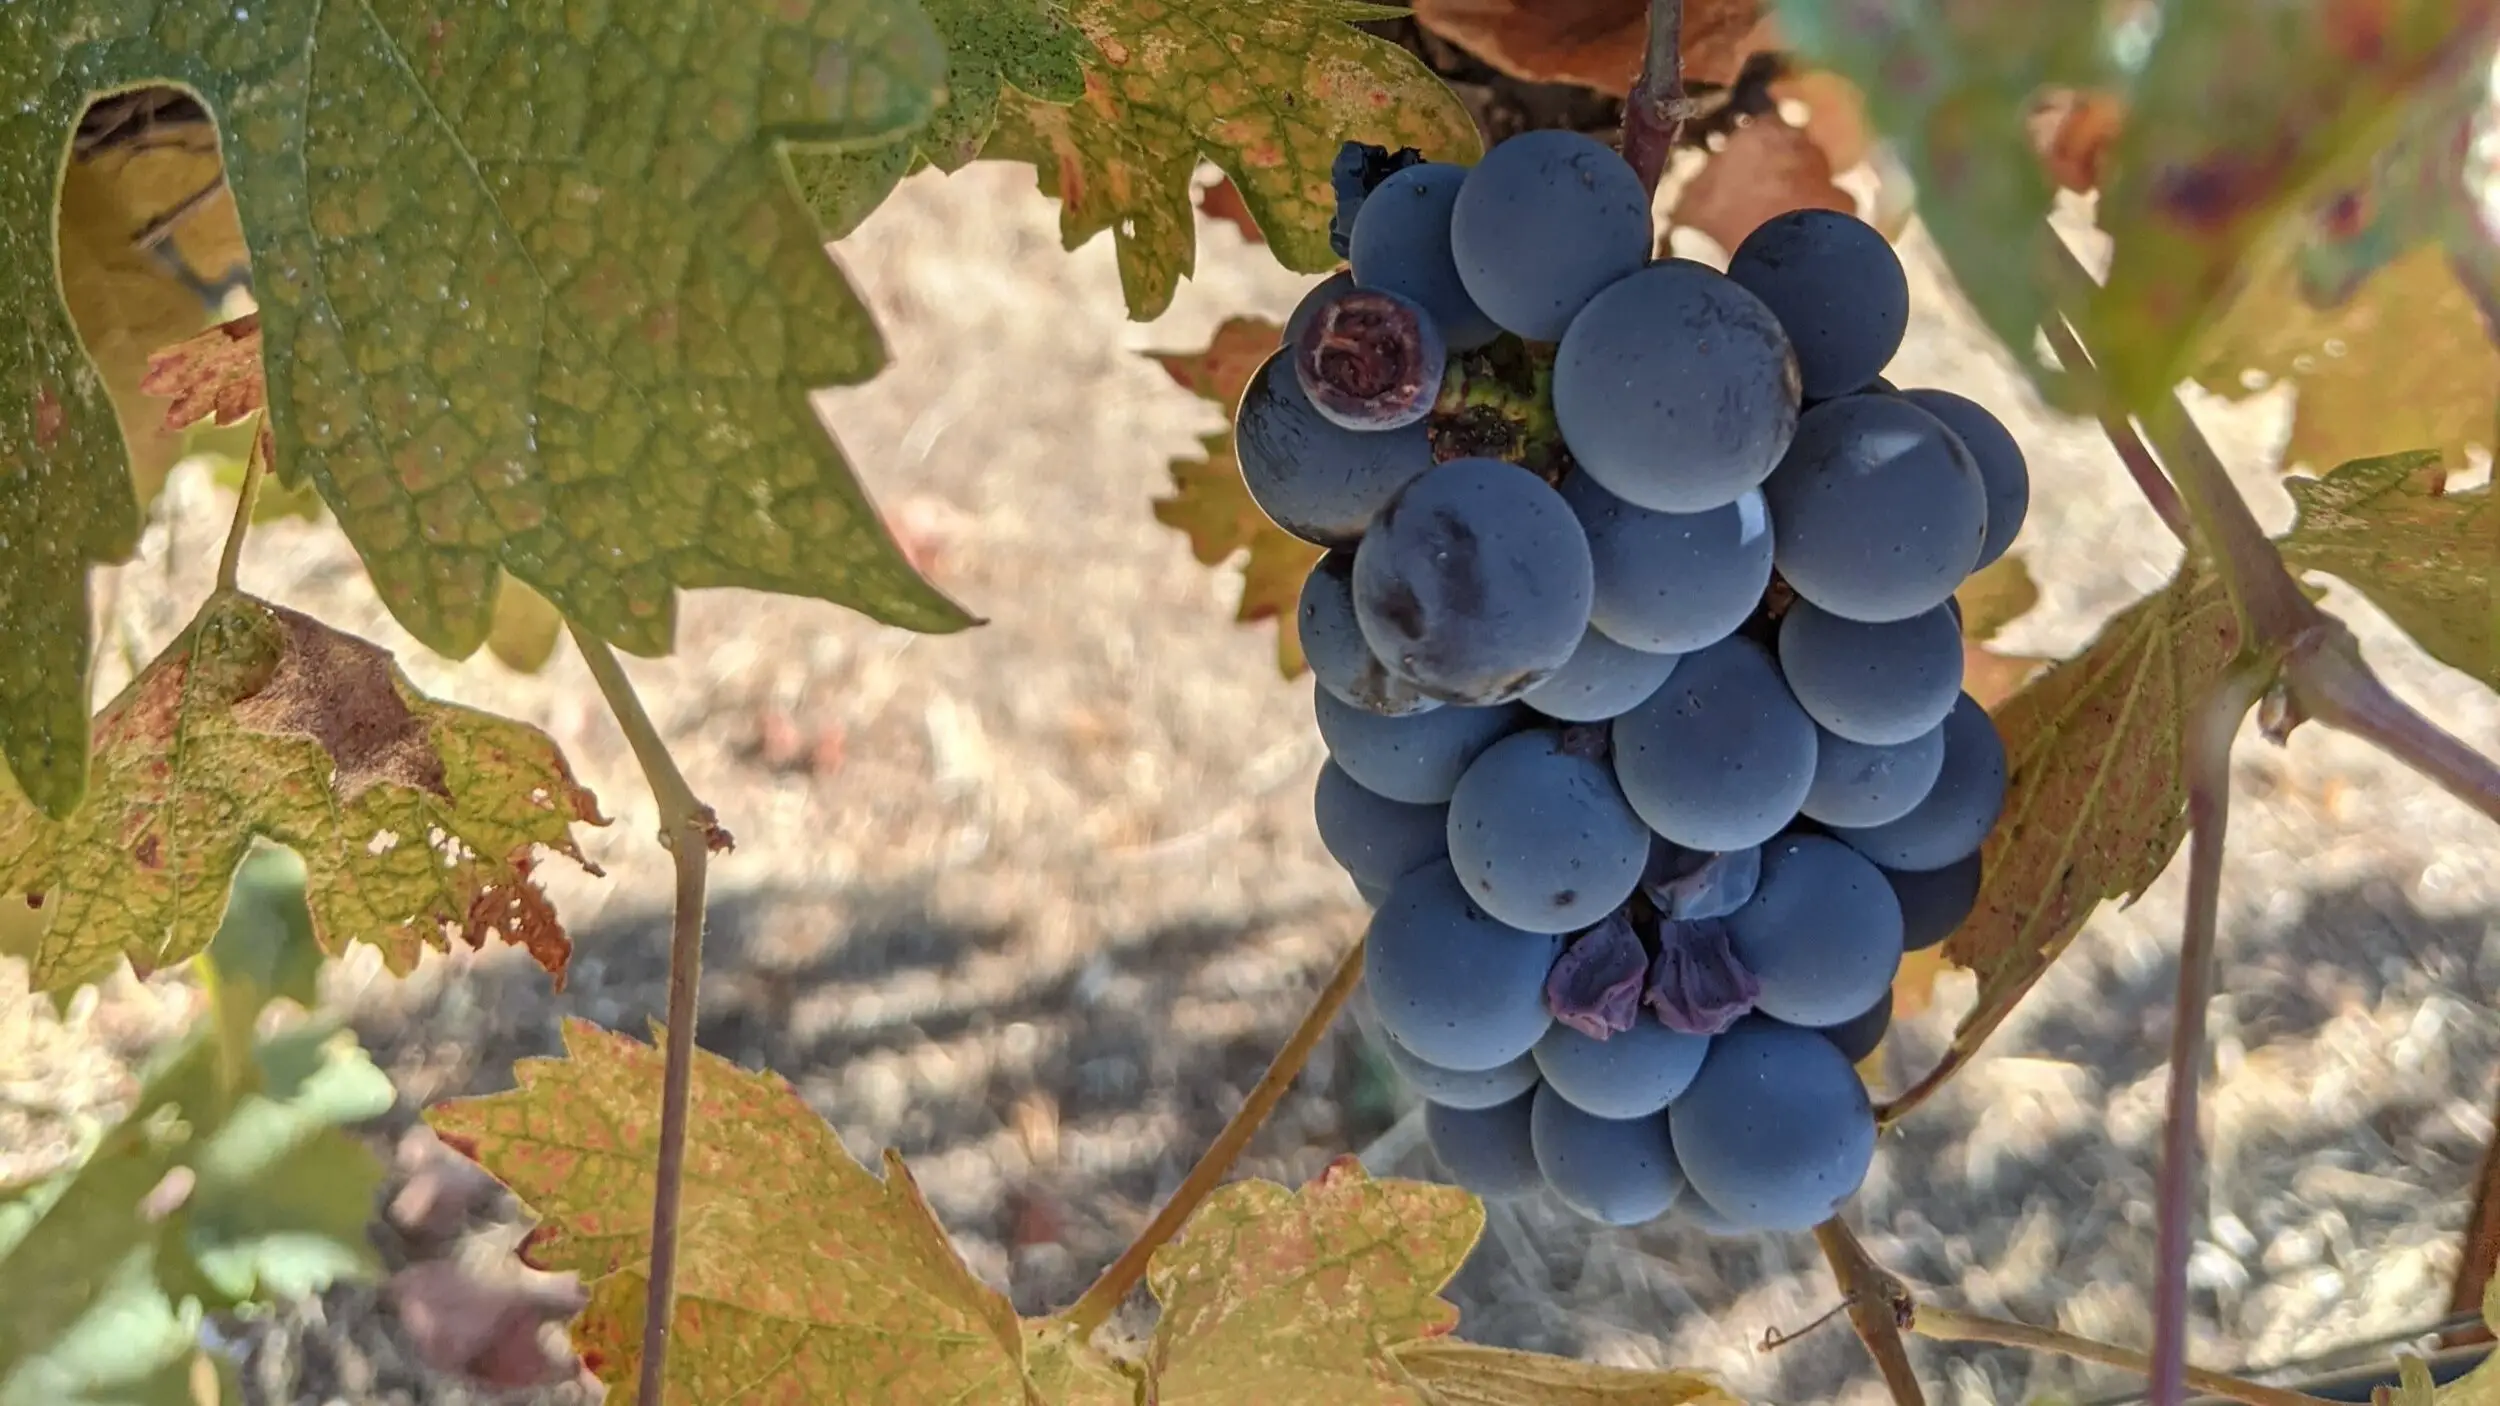 when was the phylloxera outbreak grapes - what is phylloxera and why was it important -cabernet sauvignon grapes